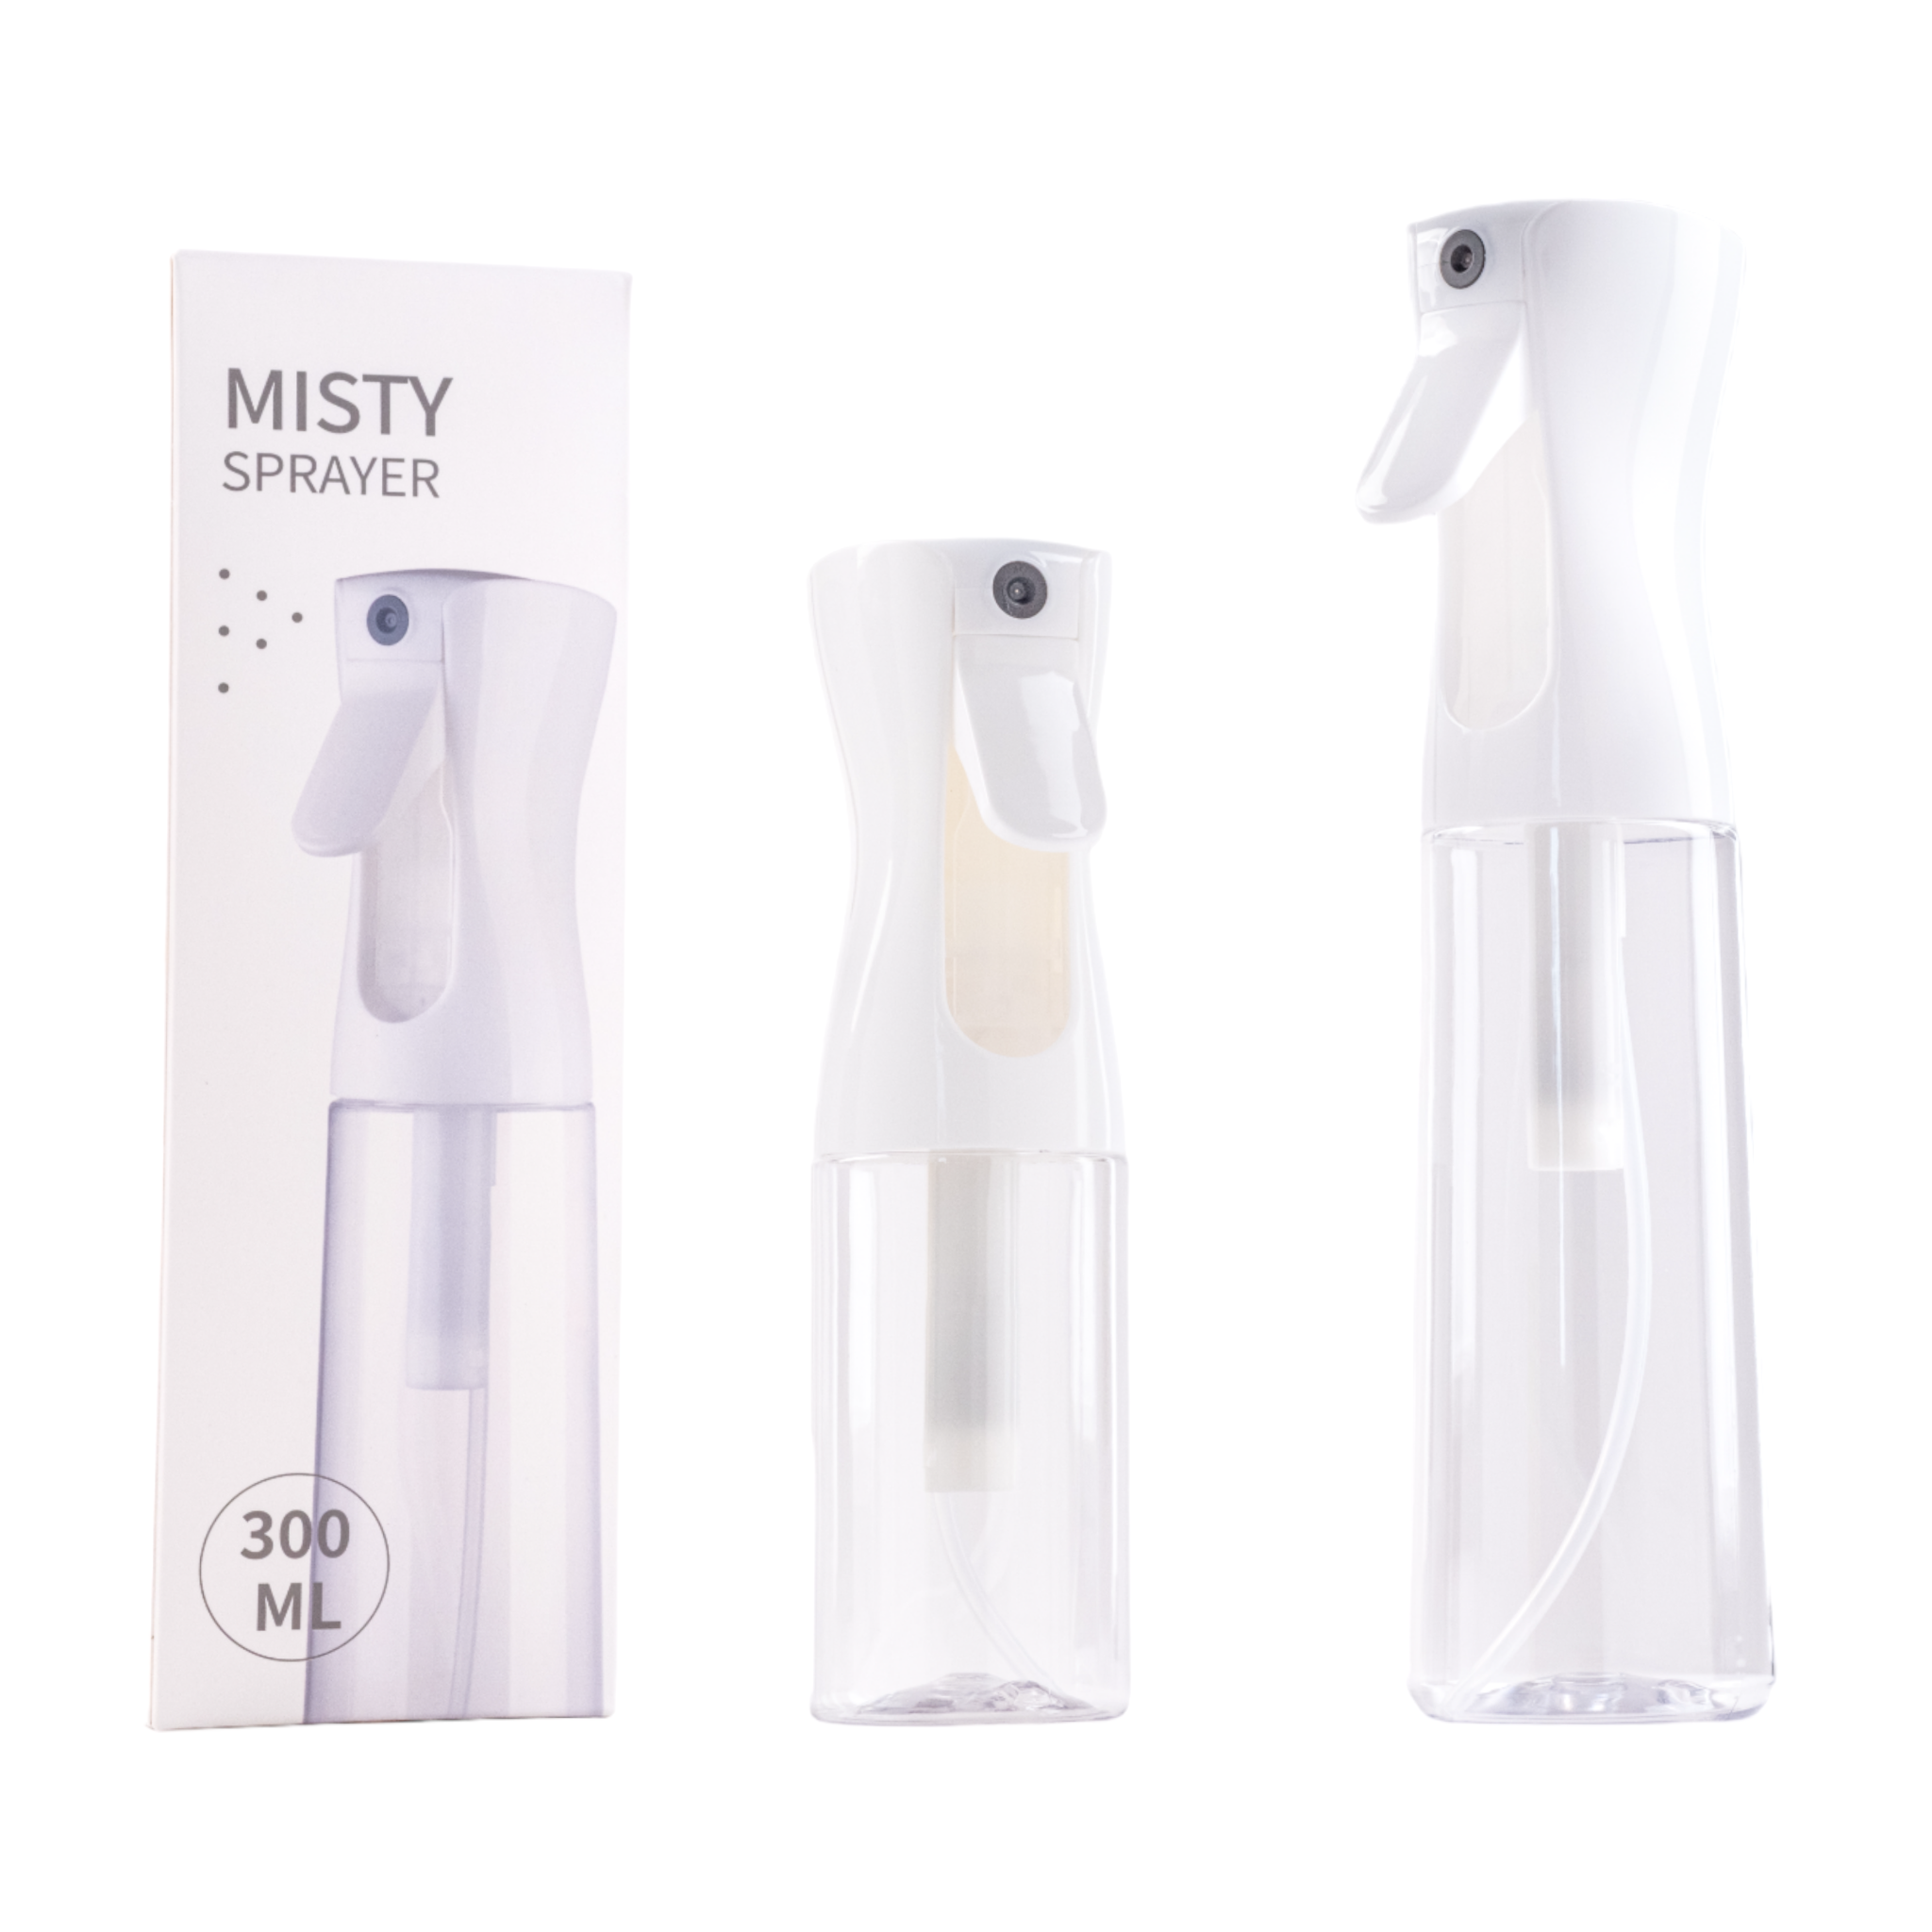 Continuous Mist Infinity Spray Bottle by Lus Brands (200ml)